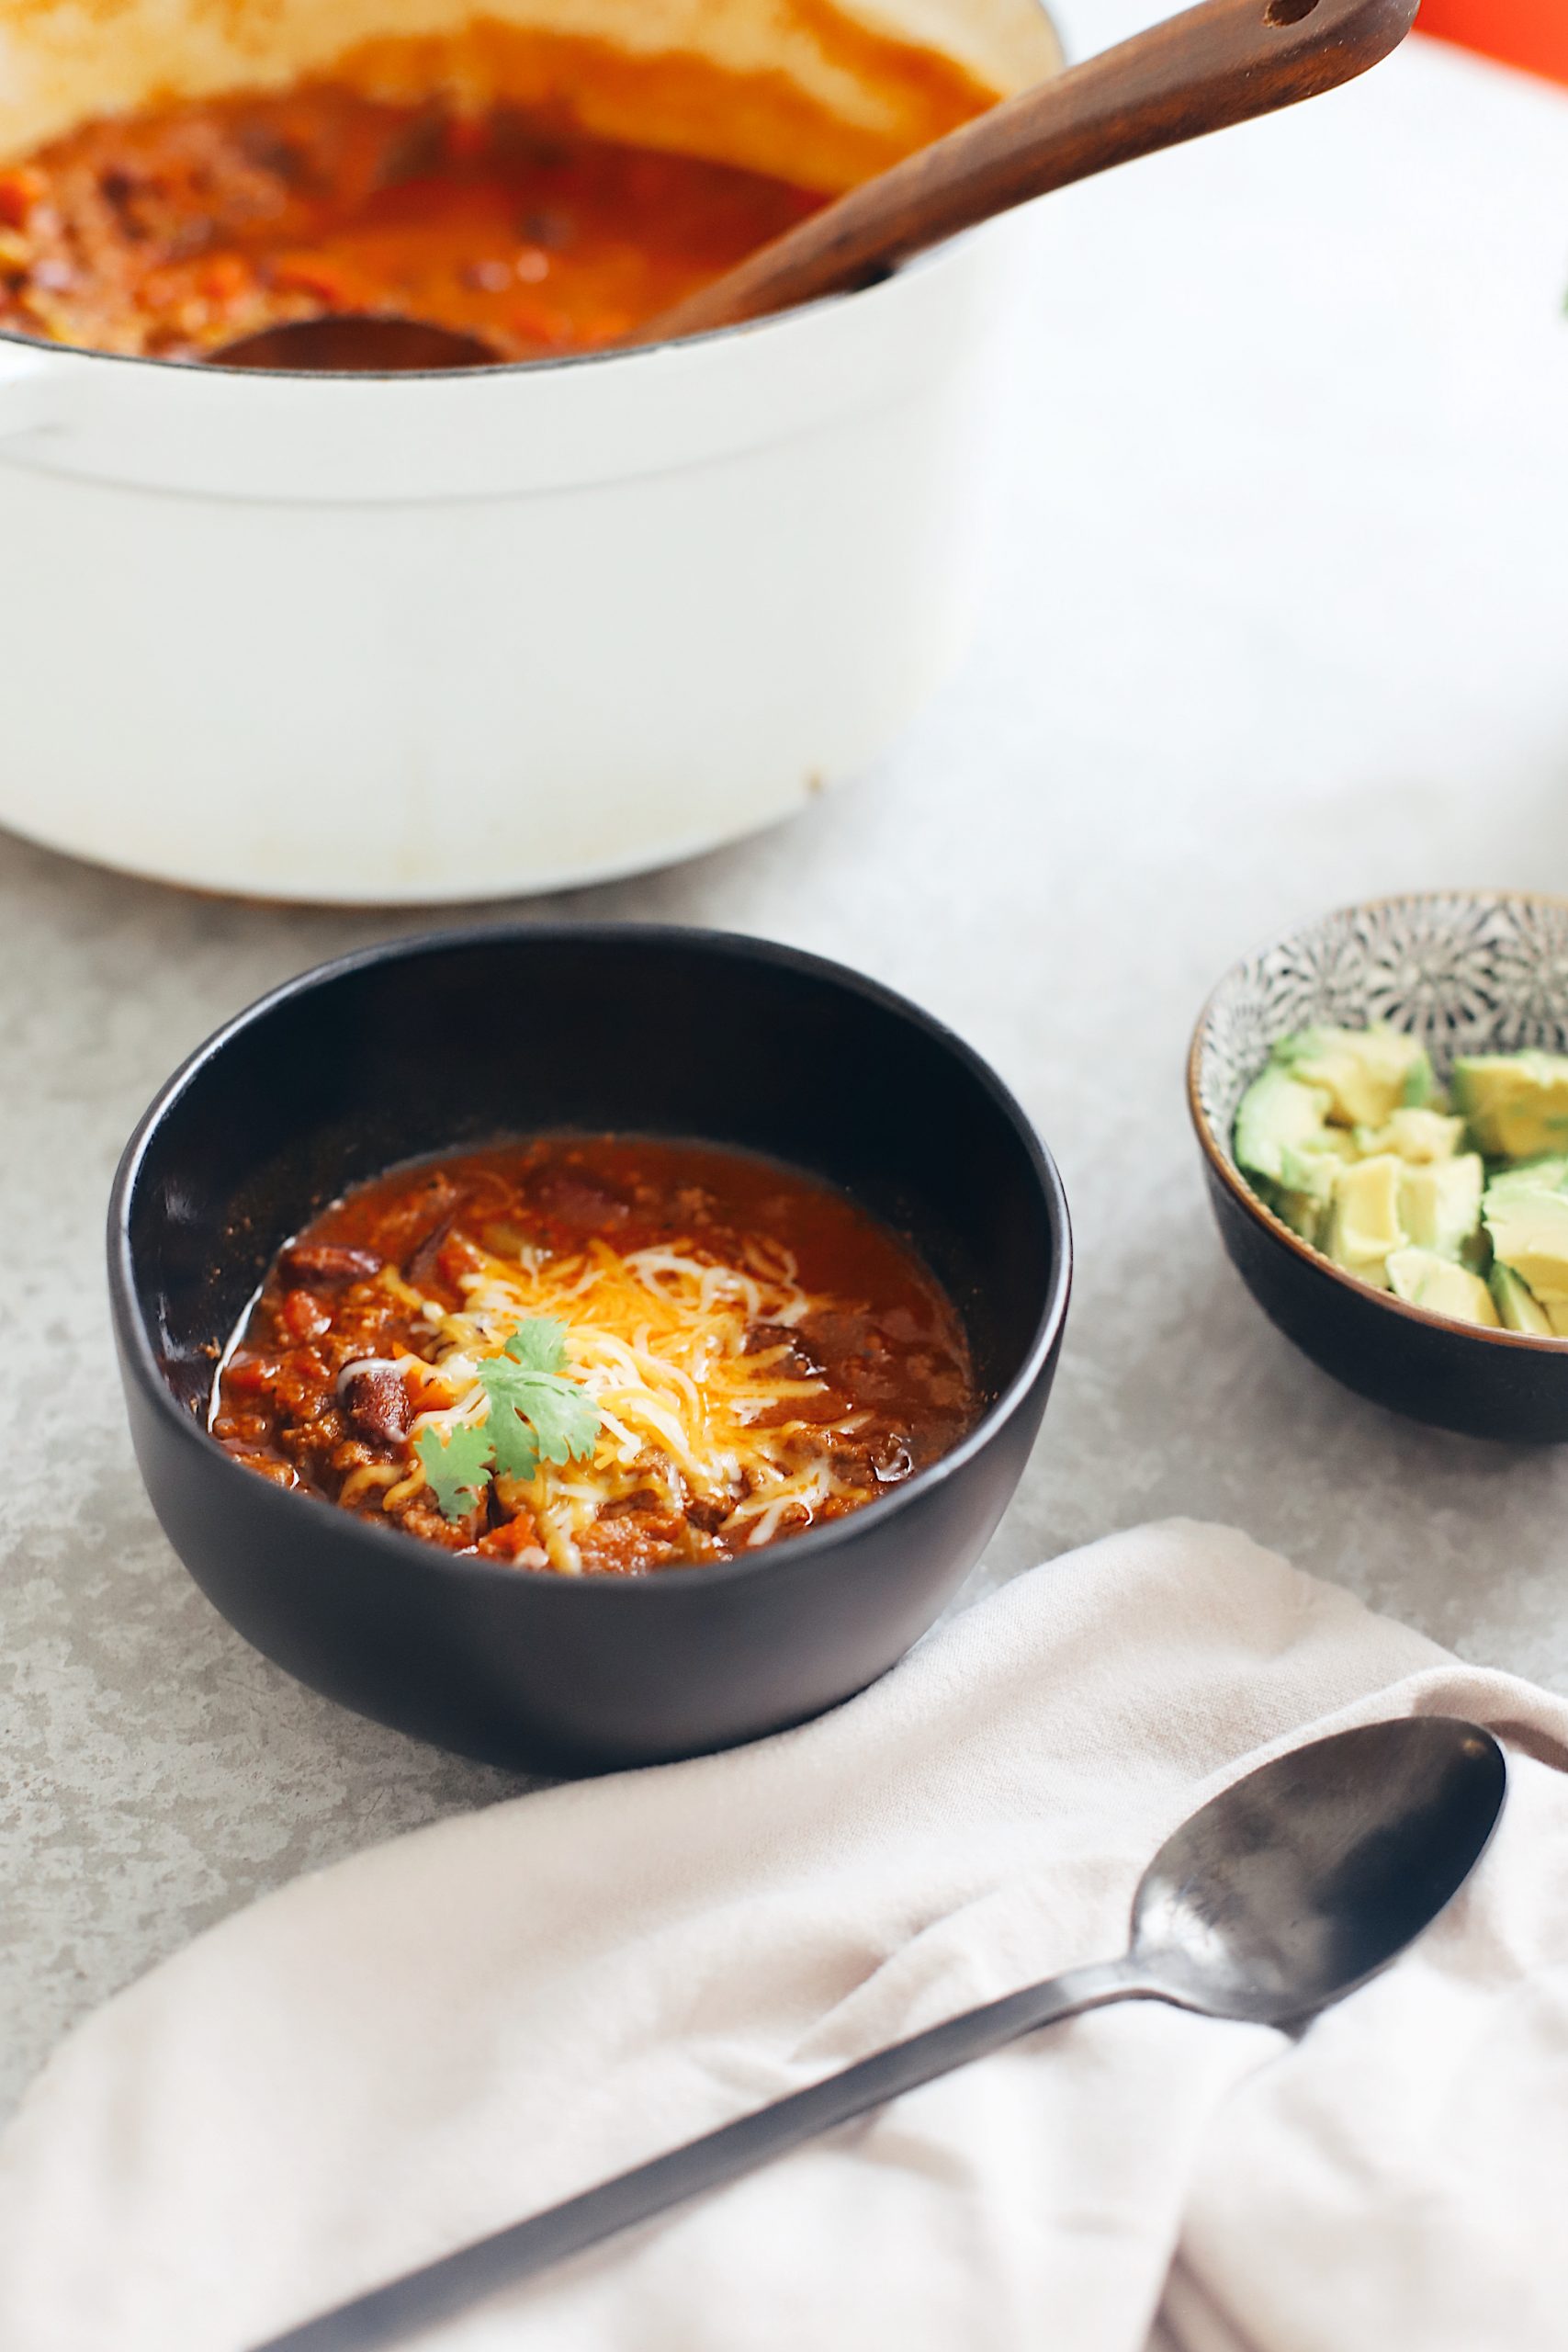 Easy Family Favorite Chili recipe! Make this delicious classic homemade chili in the crockpot or in one pot easily. It's THE BEST CHILI, and my family asks me to make it over and over. | Chili Recipe by popular Florida lifestyle blog, Fresh Mommy Blog: image of chili in a black ceramic bowl with shredded cheese on top. 